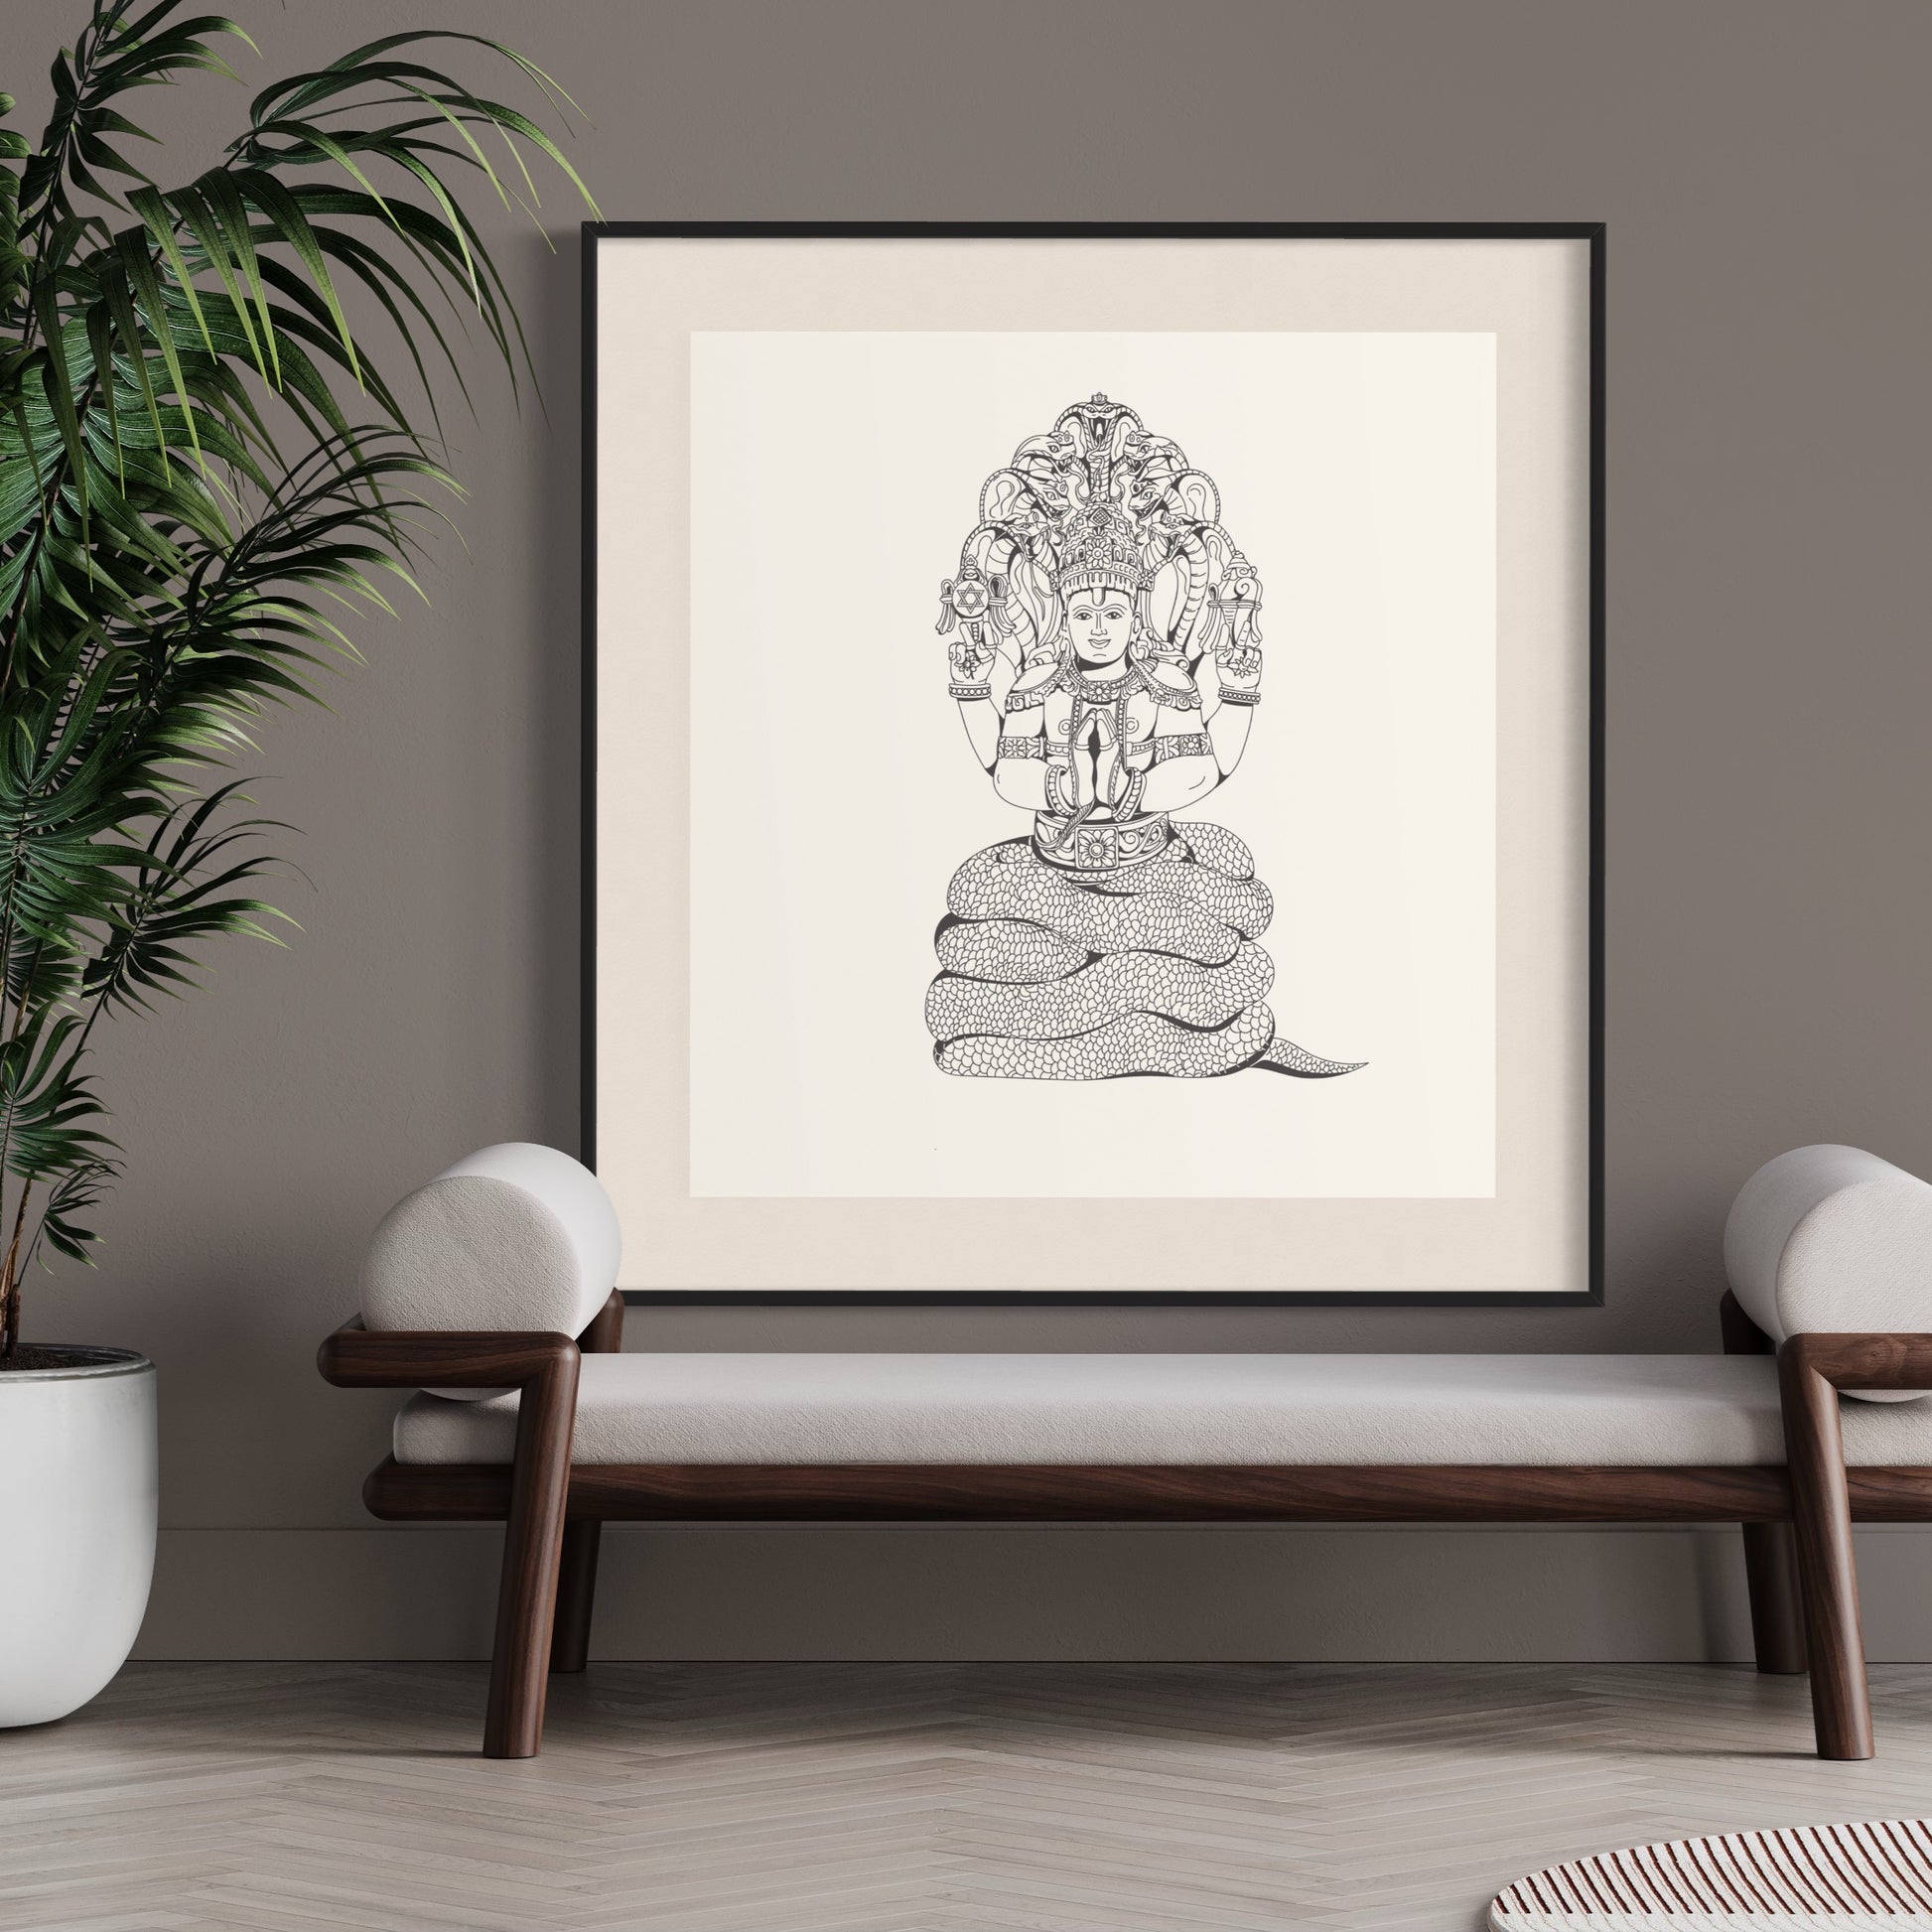 Sage patanjali print on beige wall black and white 31 X 44 cm (A3)